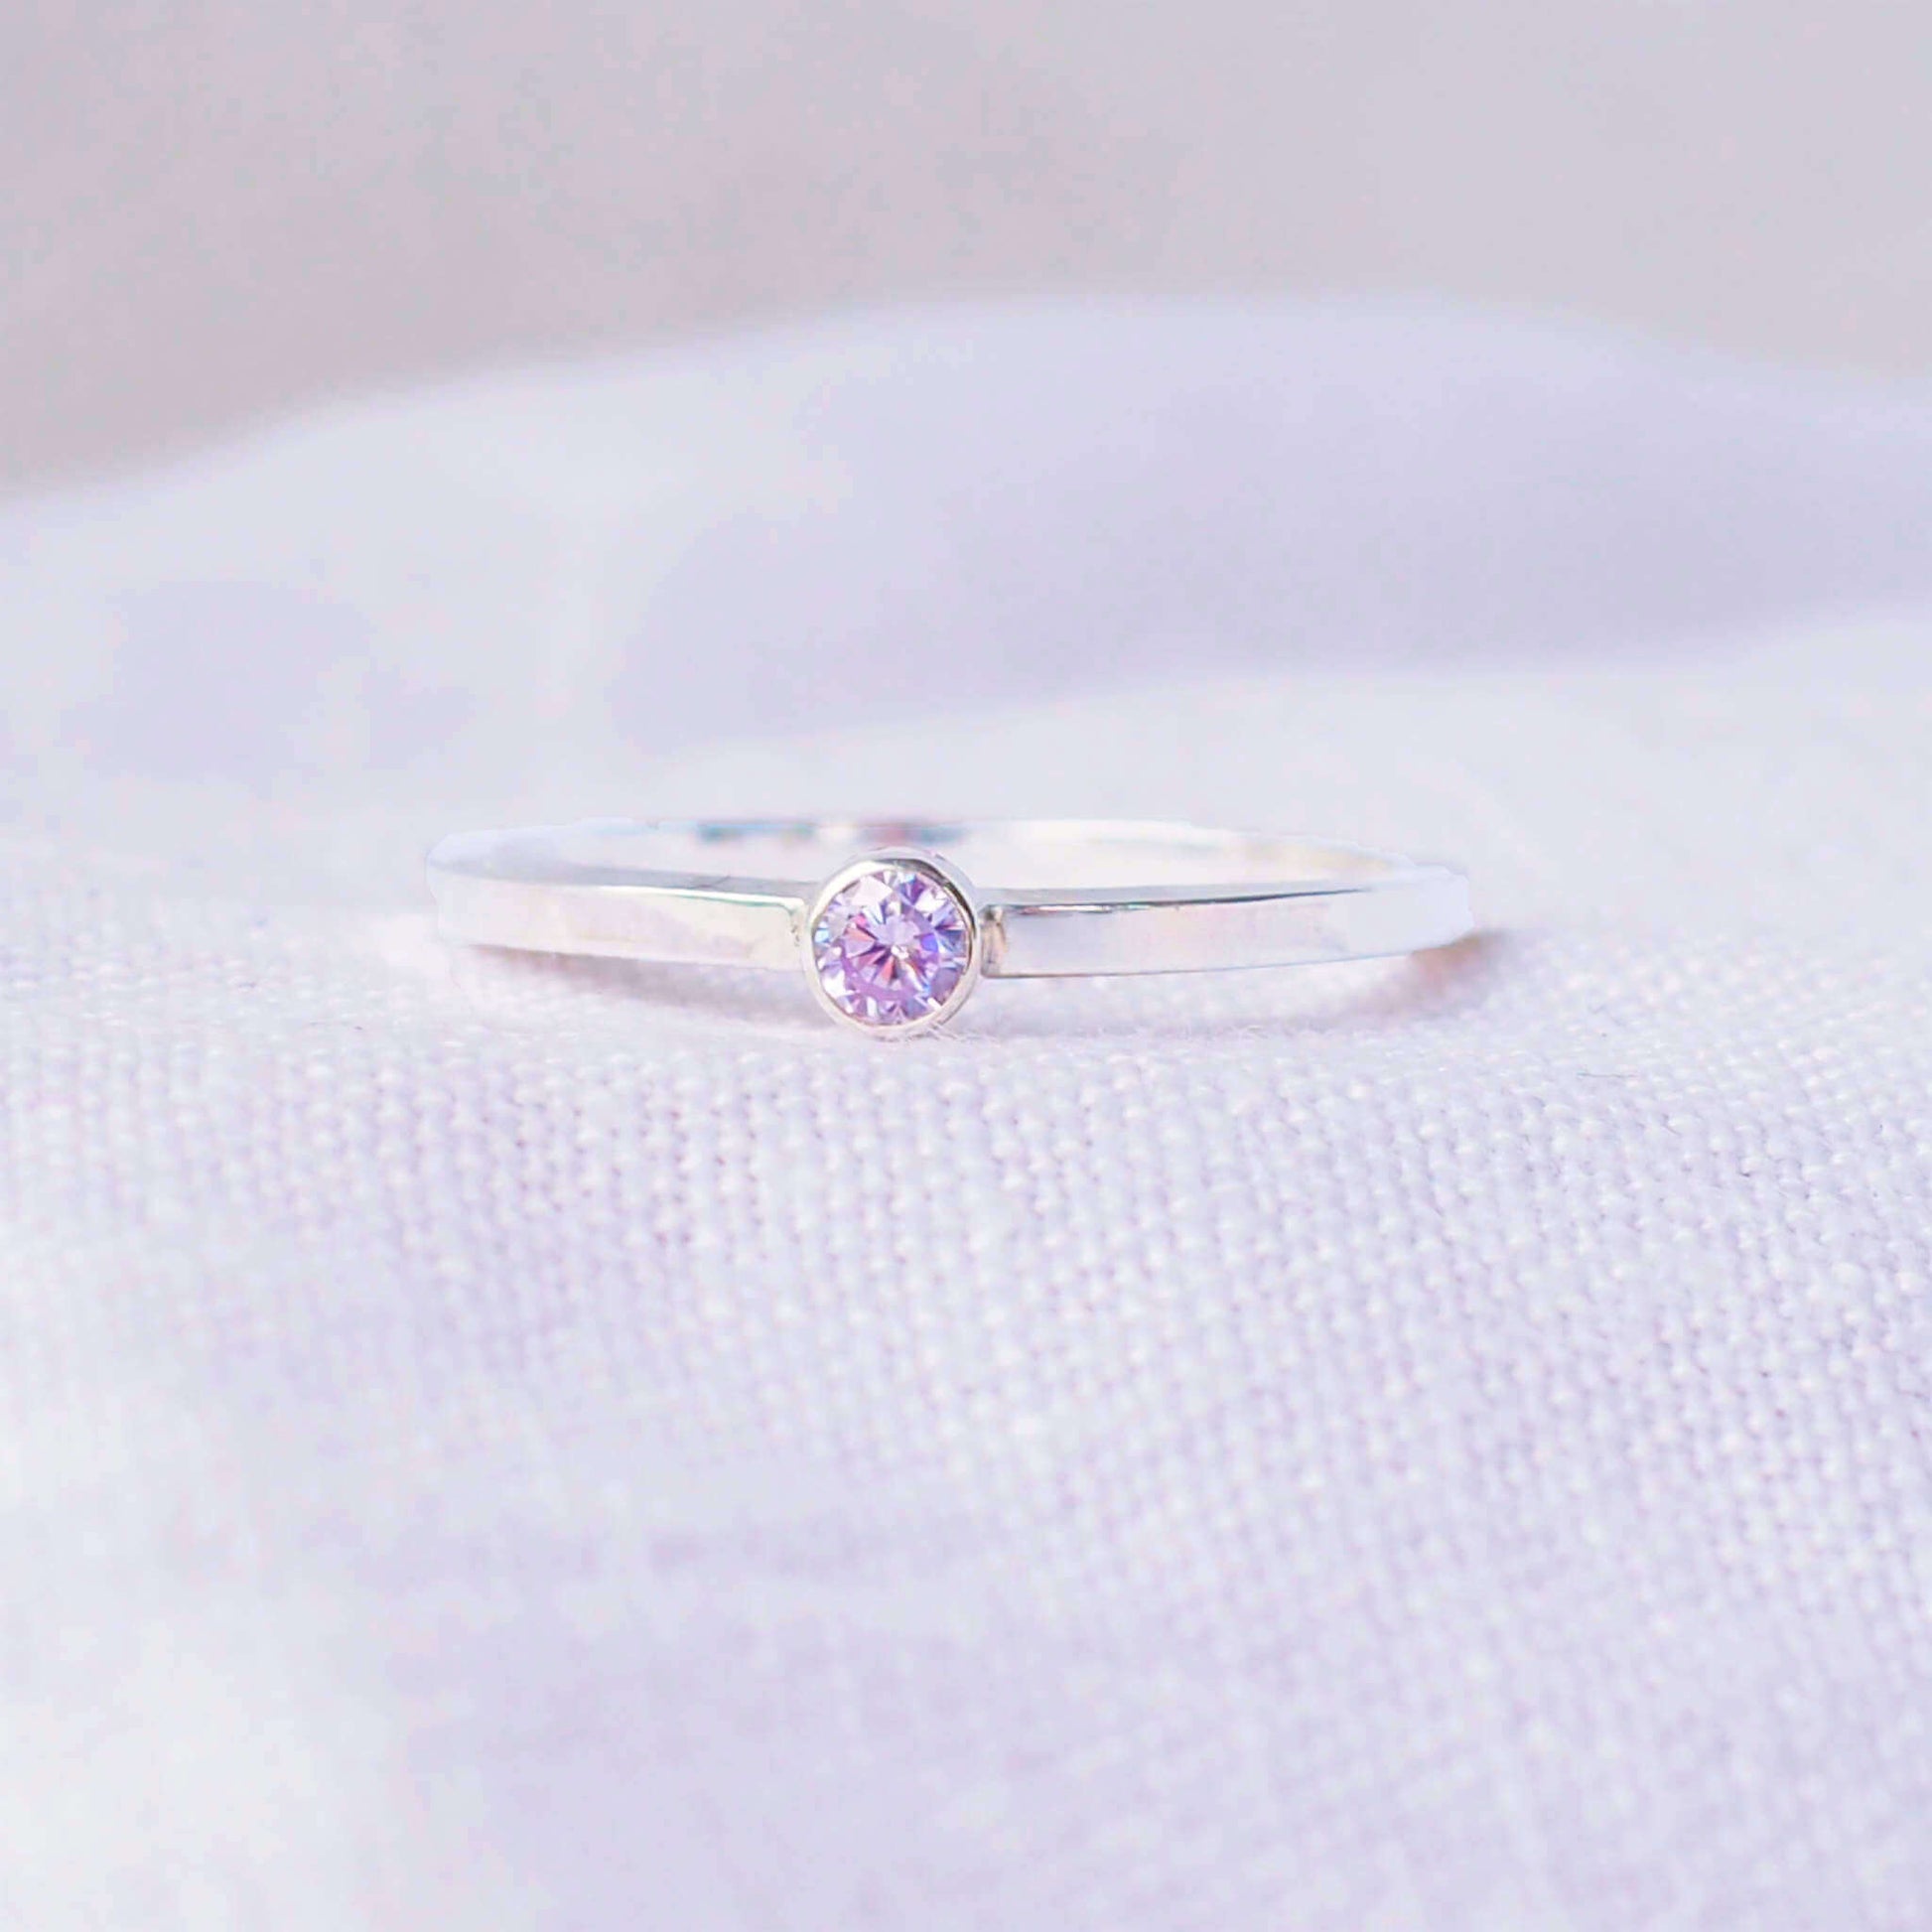 Silver ring with a lavender Alexandrite gemstone. The ring is simple in style with no embellishment , with a square wire band 1.5mm thick with a simple pale purple 3mm round cubic zirconia stone set in an enclosed silver setting. Alexandrite is birthstone for June. The ring is Sterling Silver and made to your ring size. Handmade in Scotland by Maram Jewellery